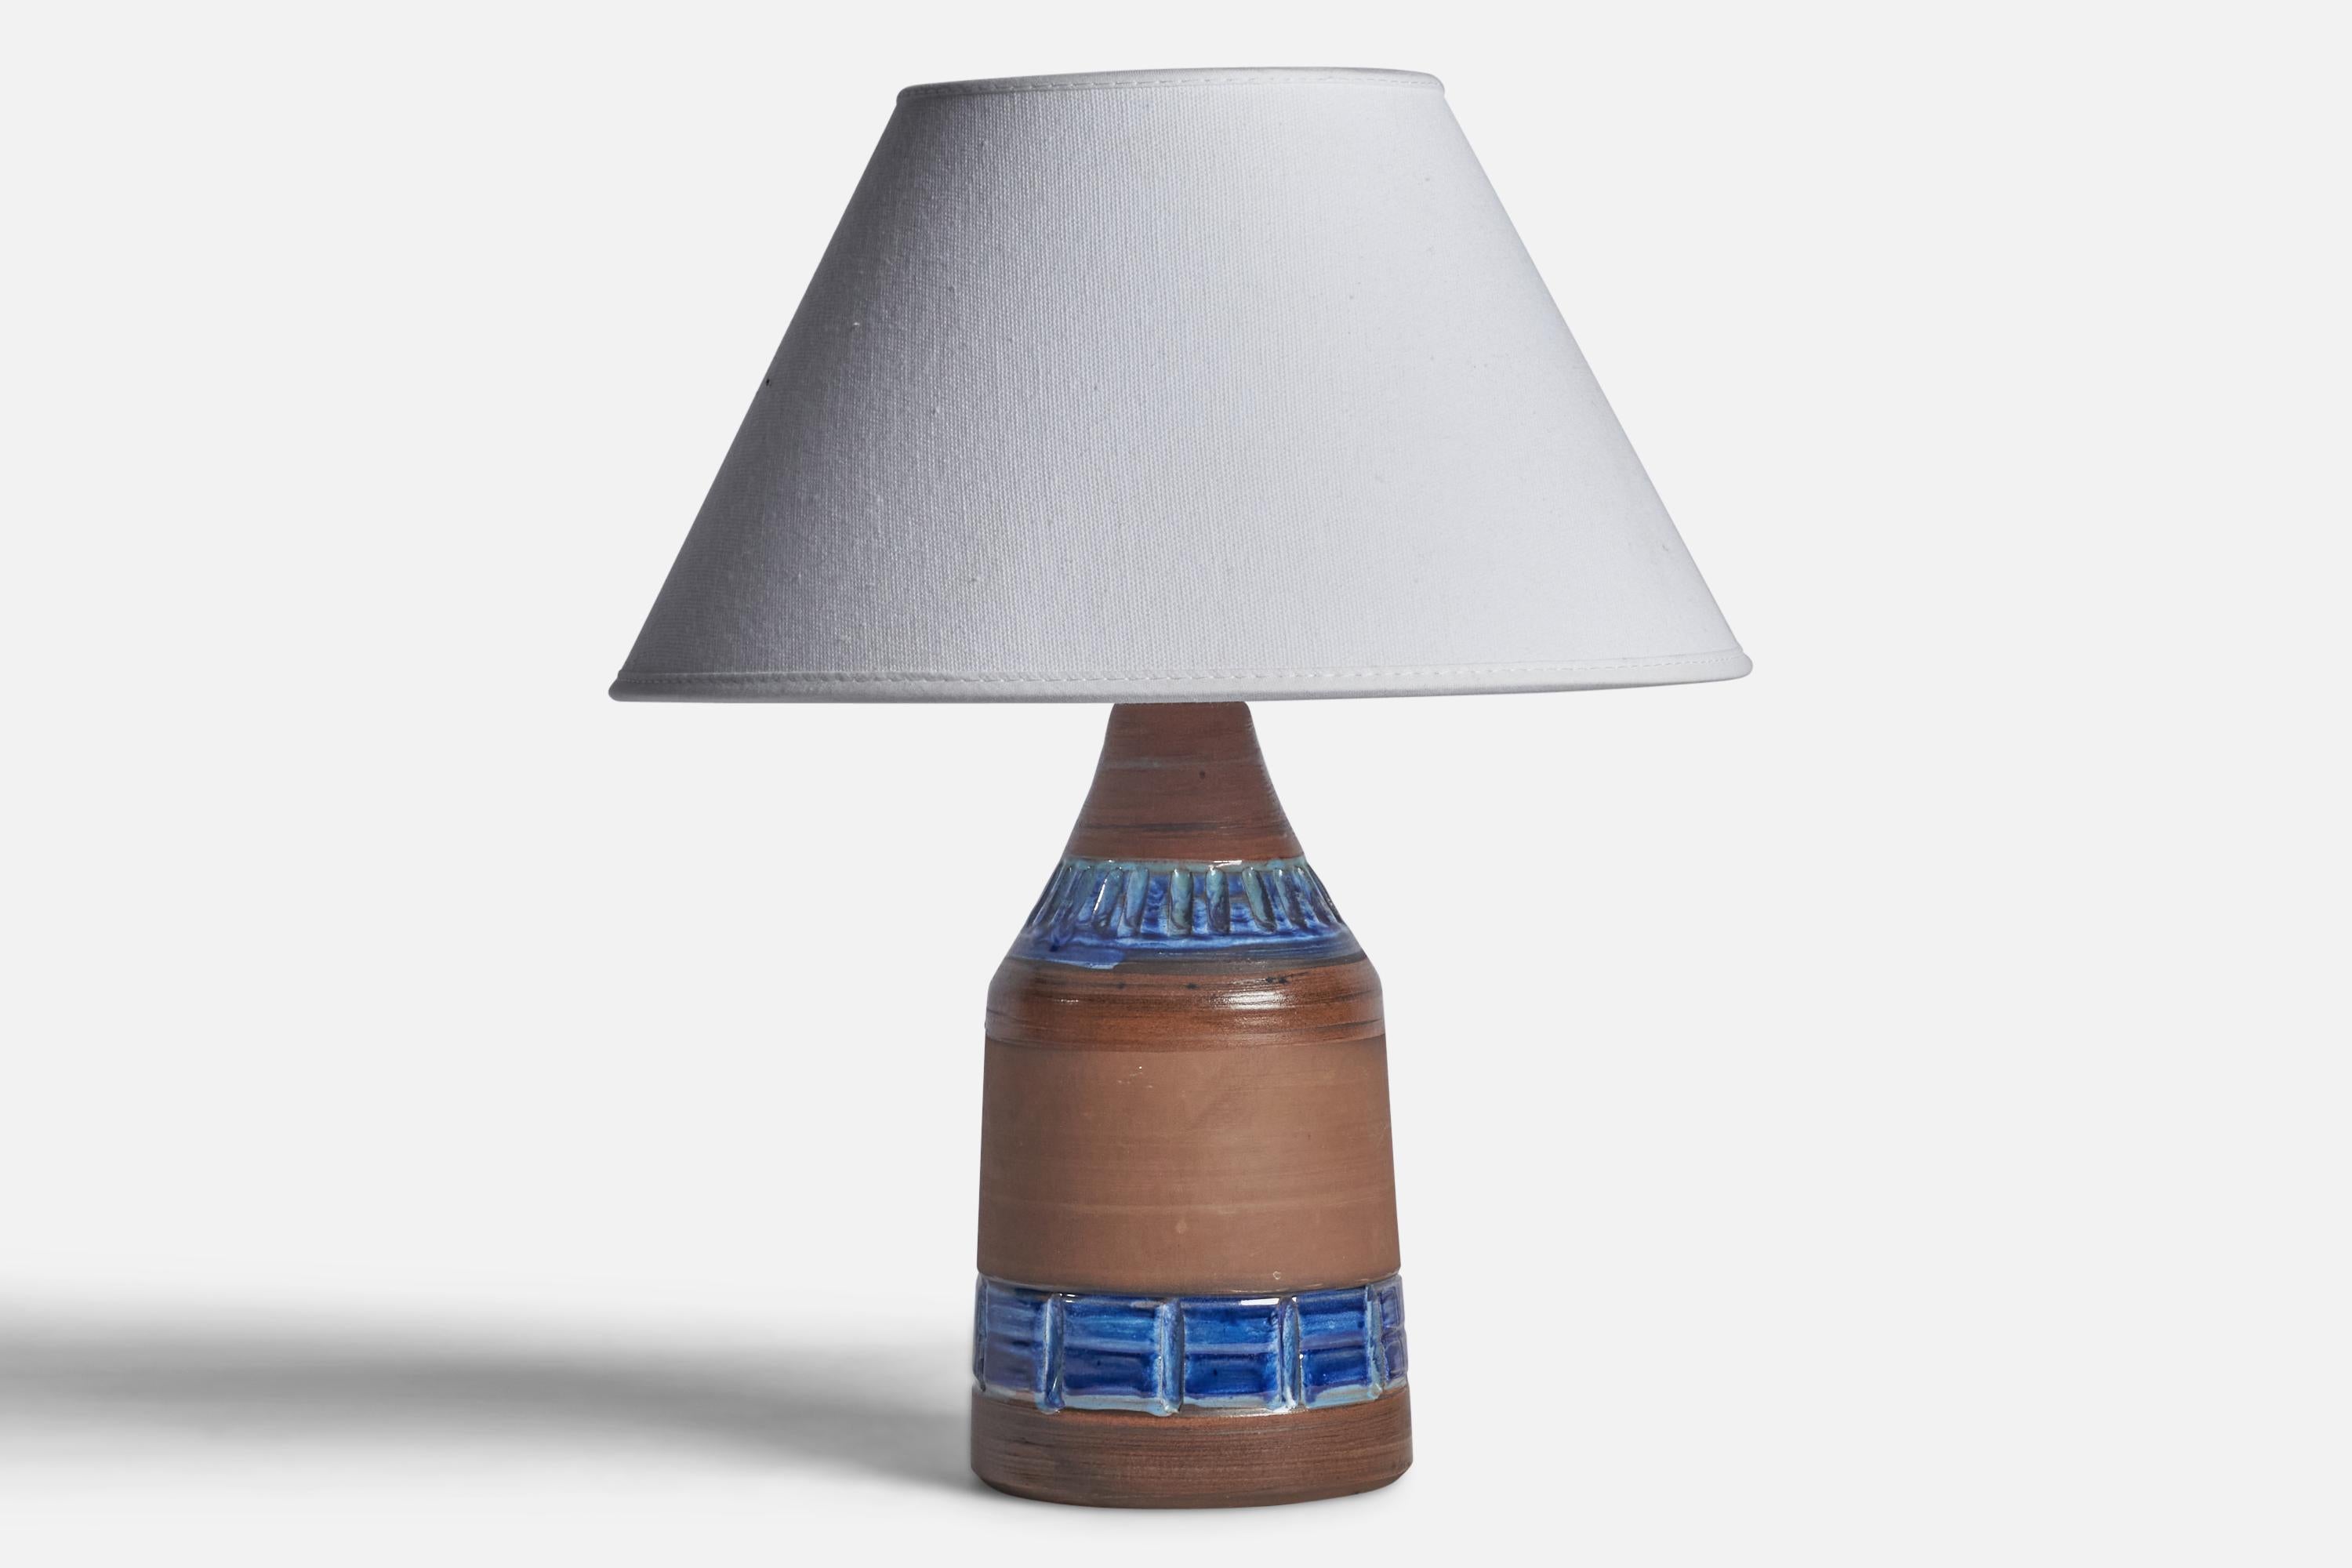 A brown and blue-glazed ceramic table lamp designed and produced in Sweden, c. 1960s.

Dimensions of Lamp (inches): 9.25” H x 3.85” Diameter
Dimensions of Shade (inches): 4.5” Top Diameter x 10” Bottom Diameter x 5.25” H 
Dimensions of Lamp with